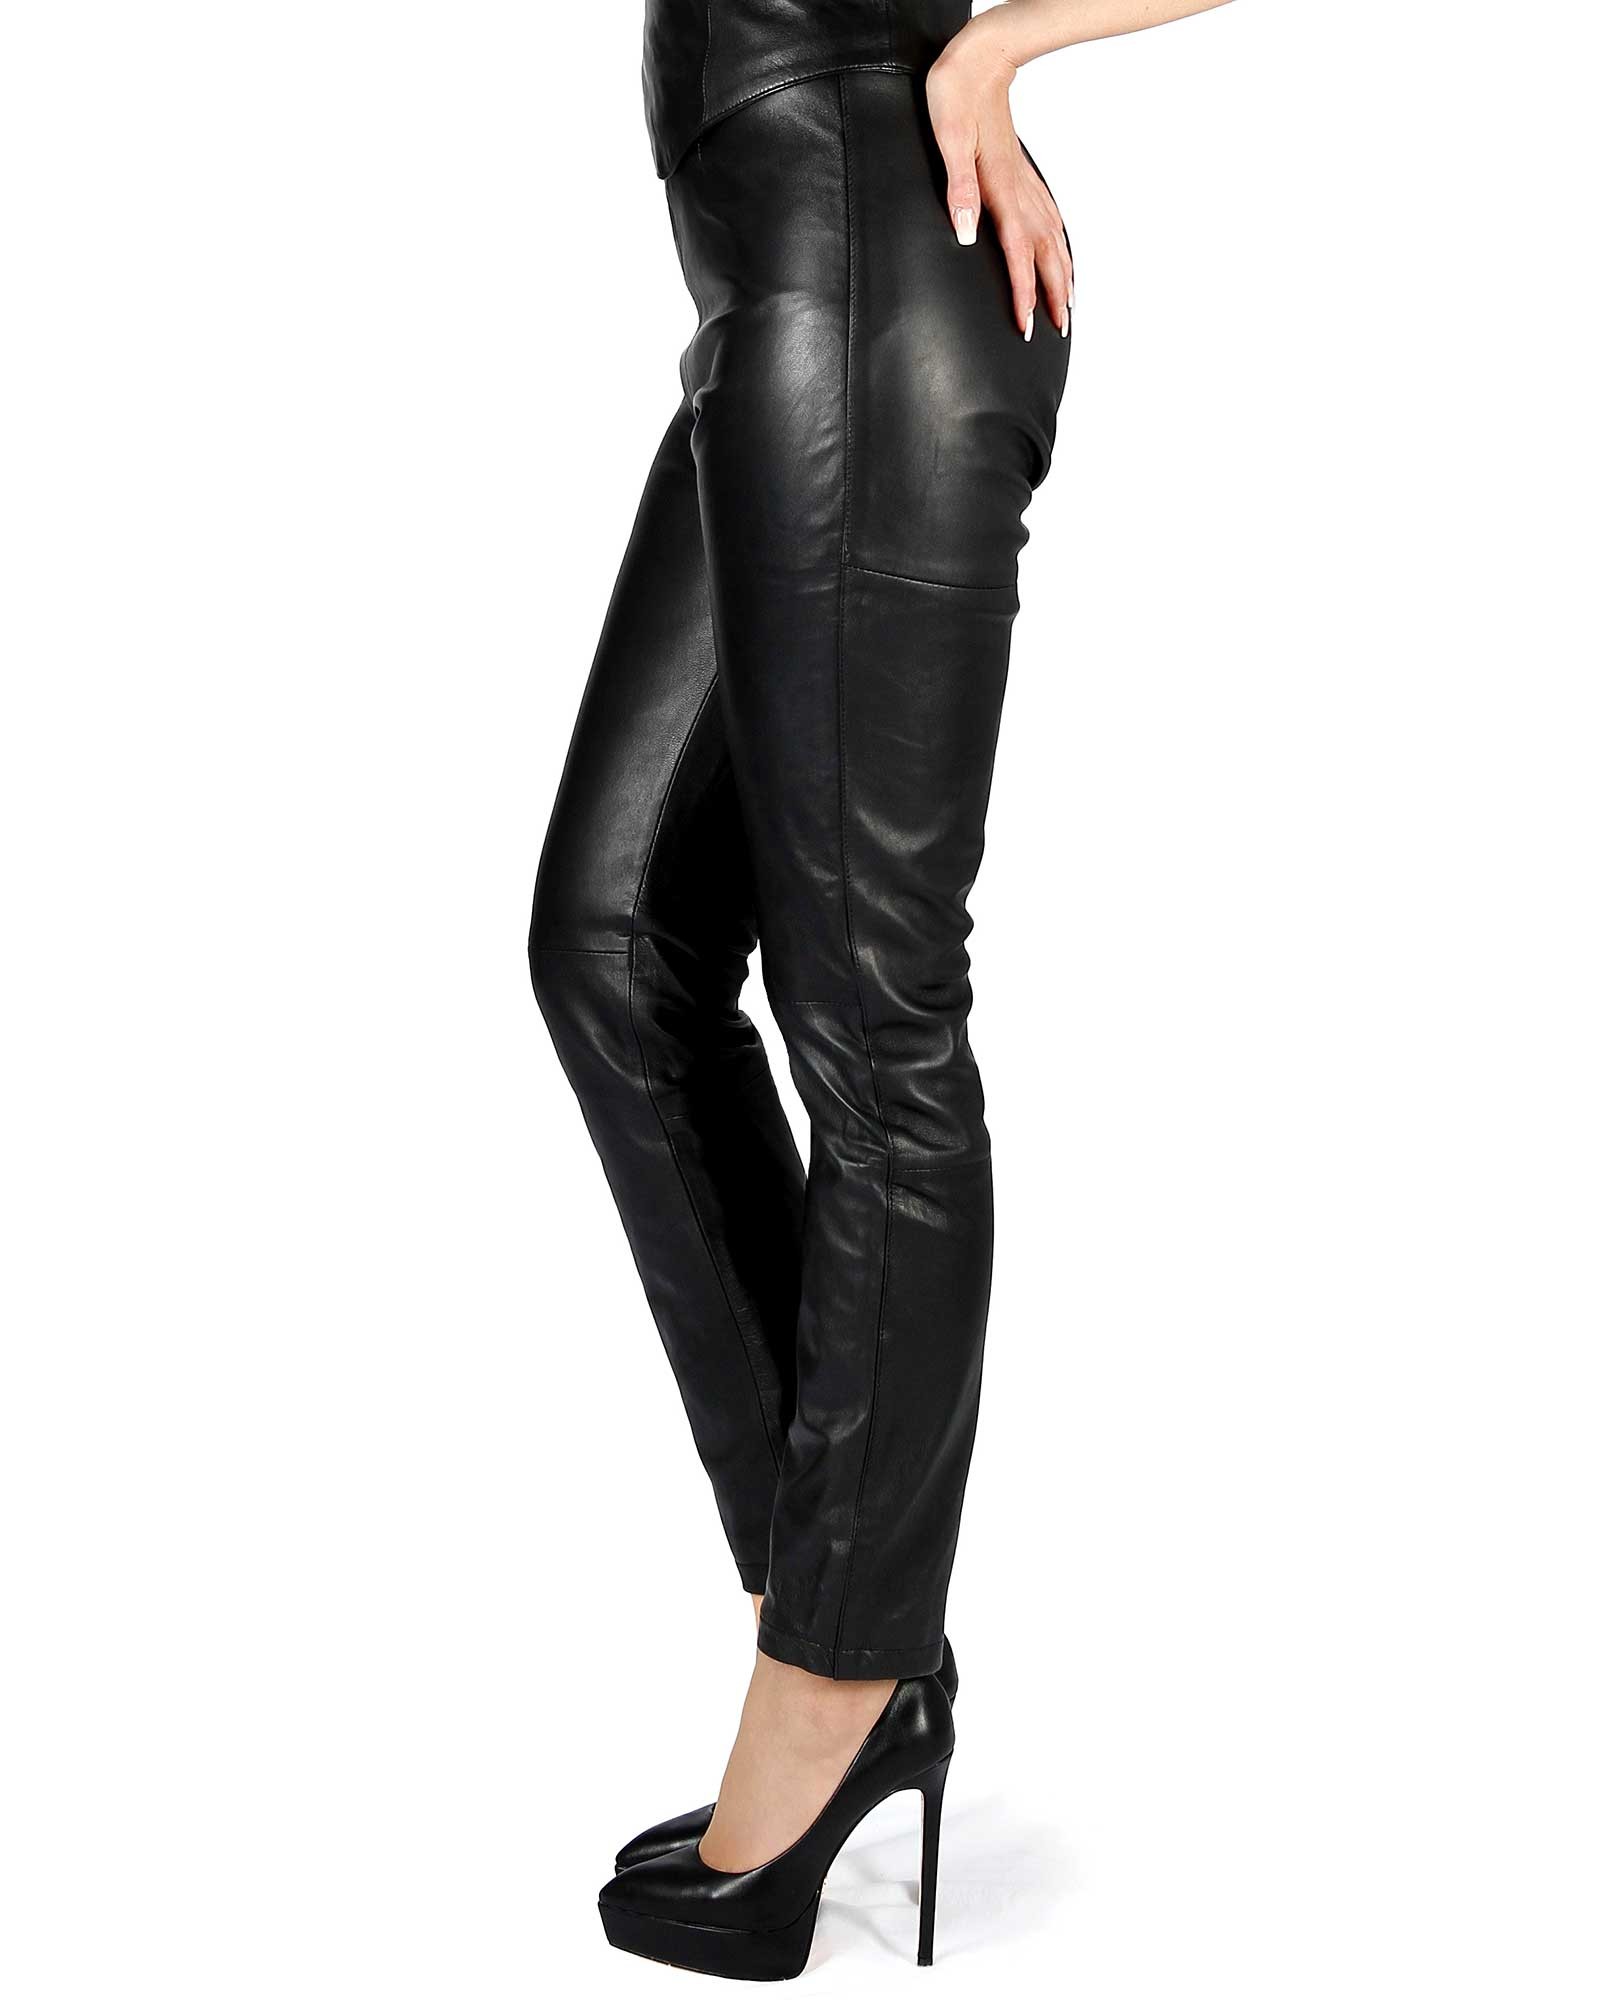 leather pants nora black with elastic waistband and zipper on the back leggings made of real lamb nappa leather